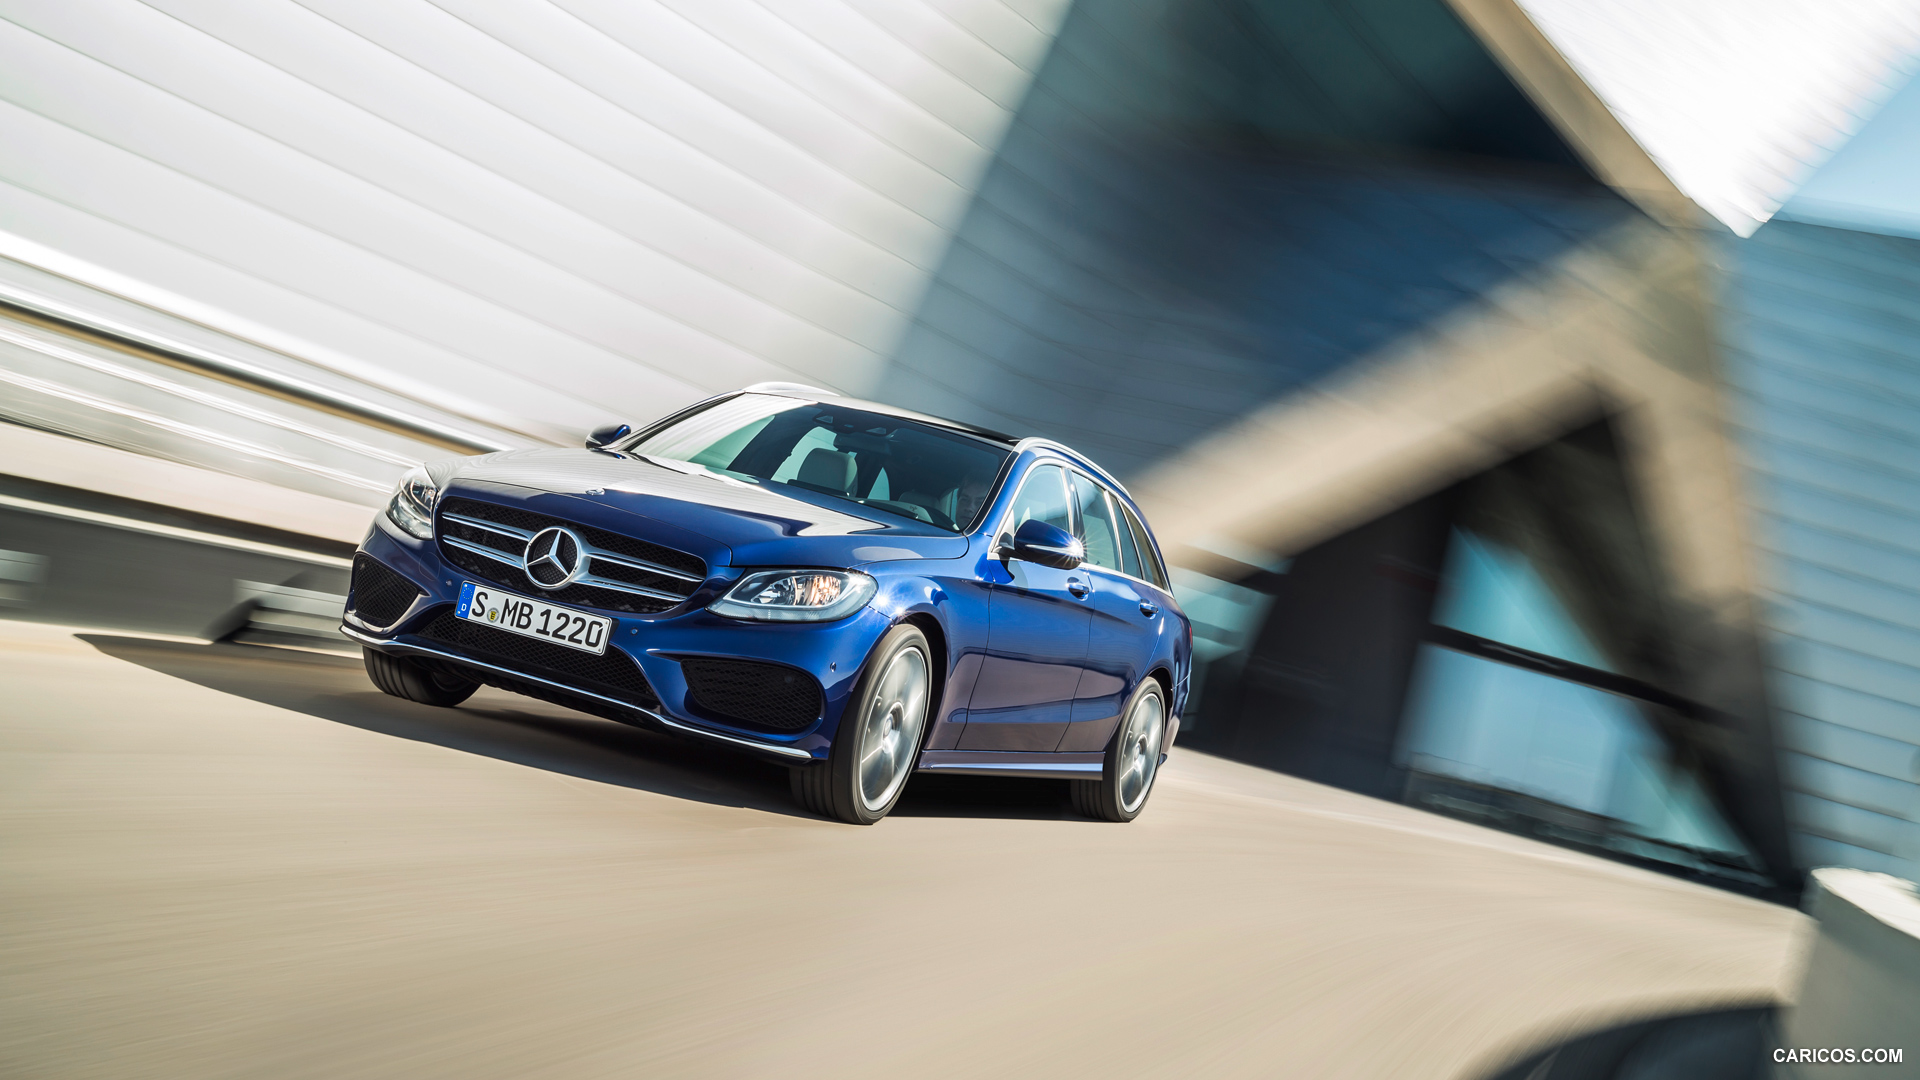 2015 Mercedes-Benz C-Class Estate C250 BlueTEC 4MATIC (AMG sports package) - Front, #64 of 173